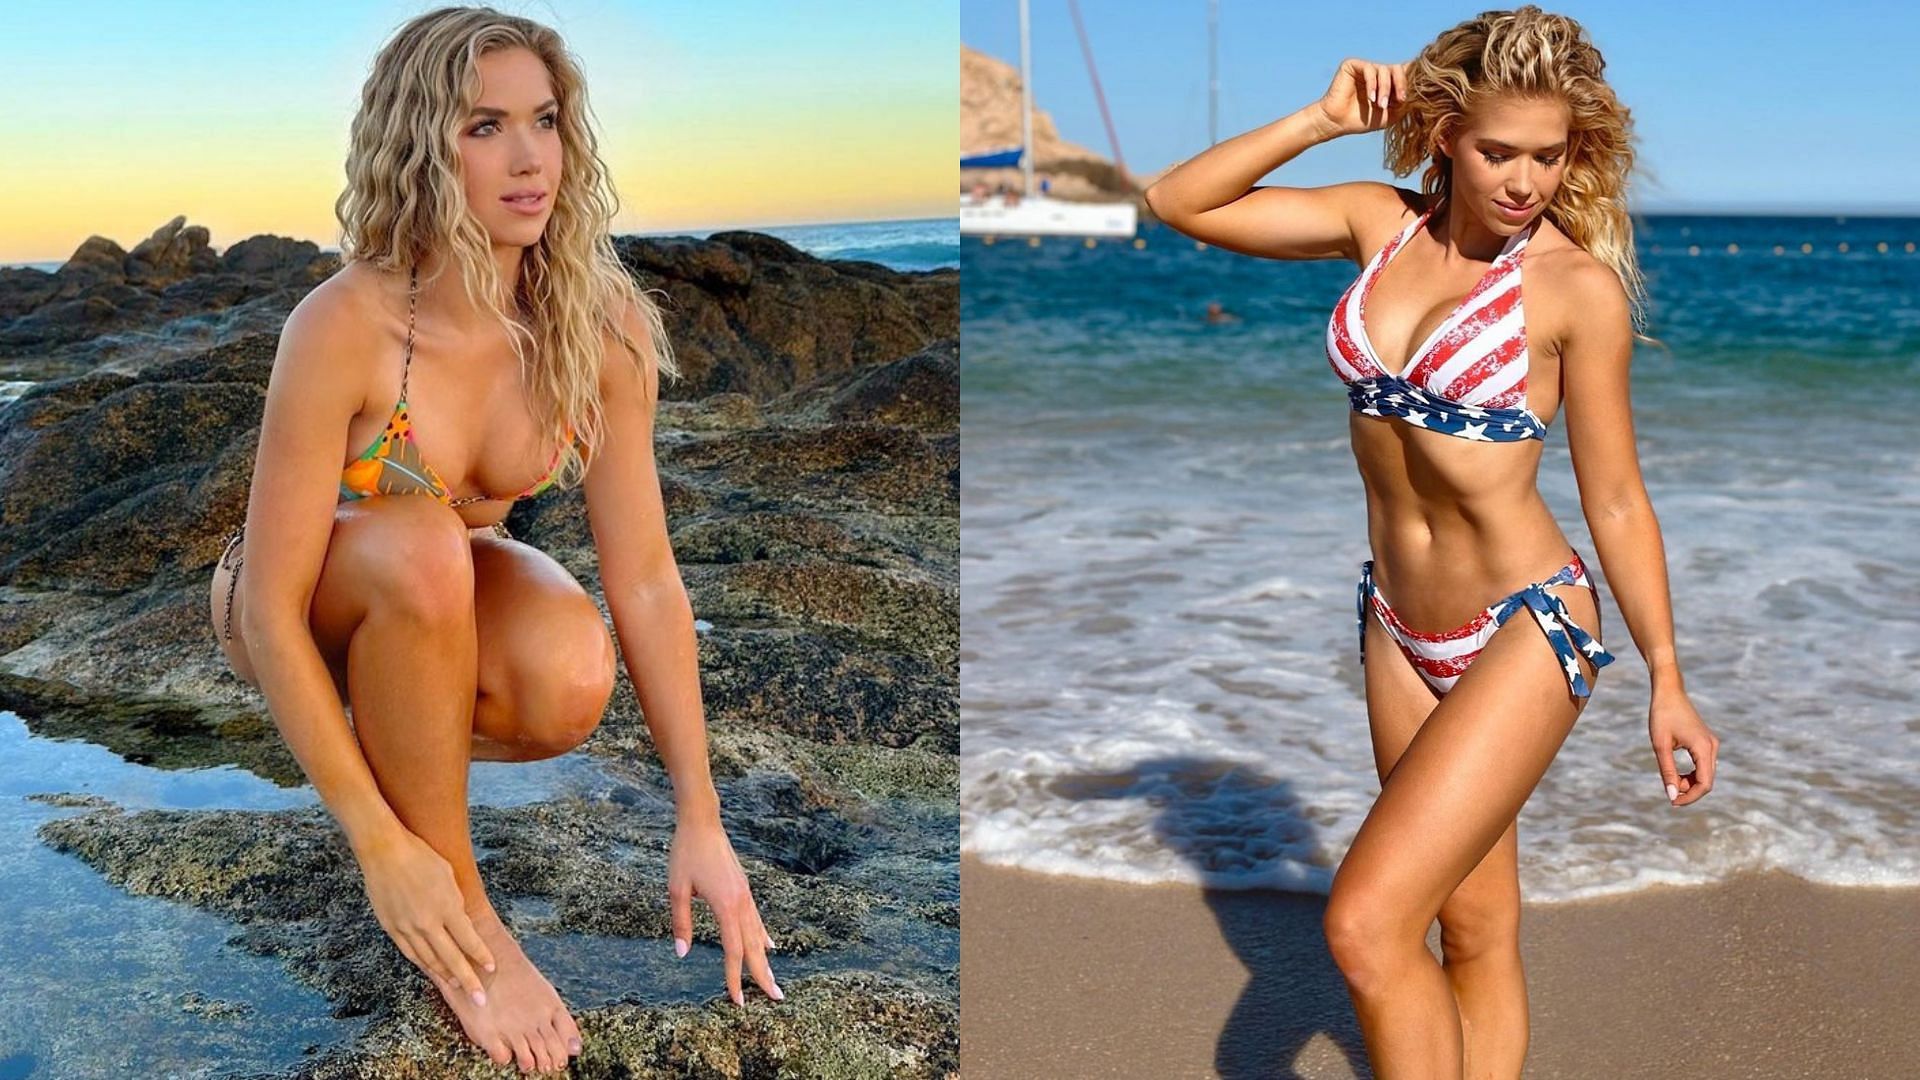 Gracie Hunt enjoyed her time at Cabo San Lucas during the 2023 Memorial Day weekend. (Image credit: Instagram.com/graciehunt)